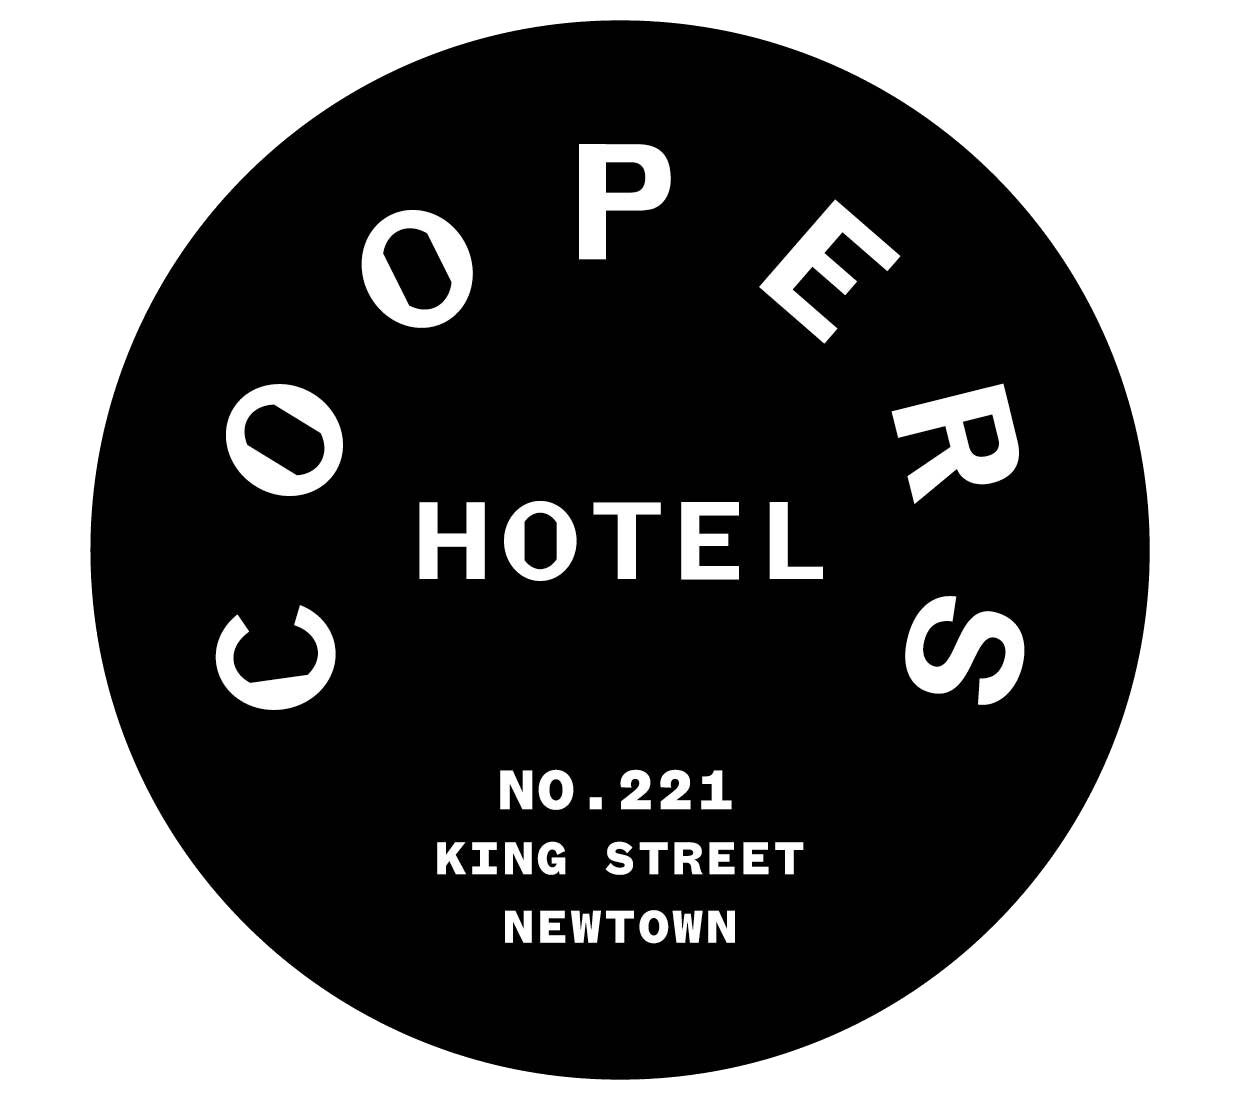 THE COOPERS HOTEL